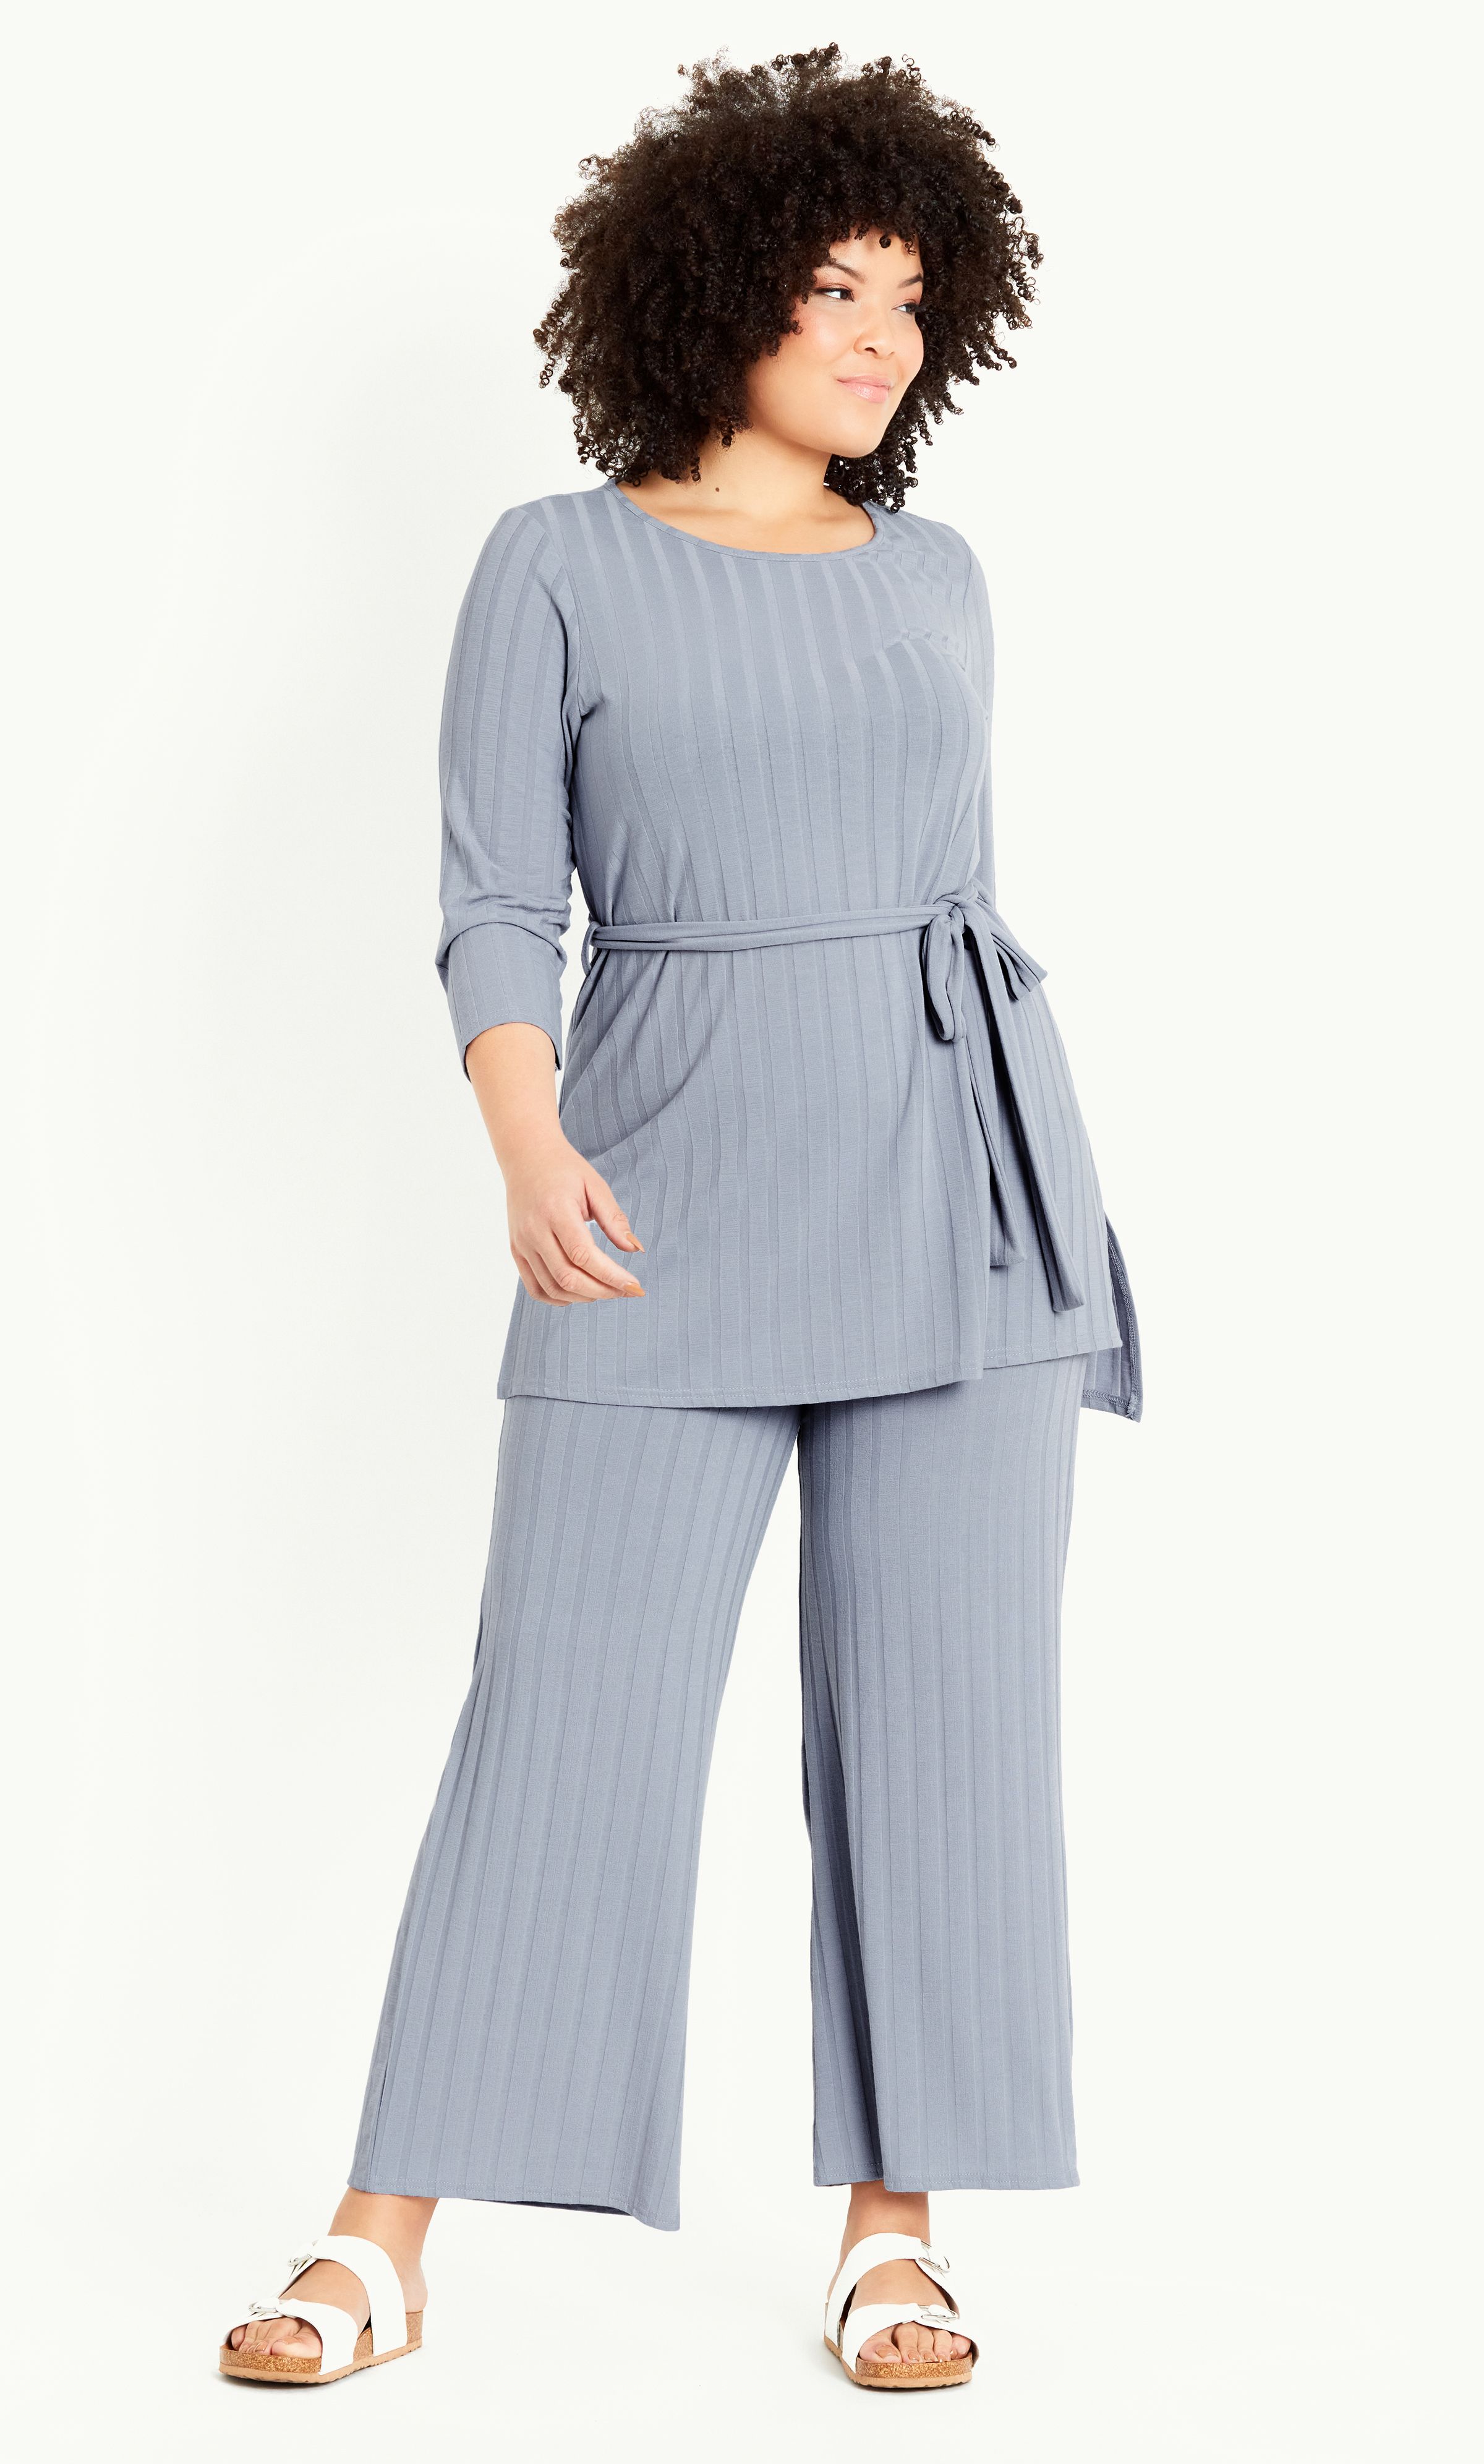 Add to your loungewear rotation with the cosy stylings of our ultra soft Ribbed Belted Tunic! Offering a crew neckline, long sleeves and removable self-tie waist belt, this top seamlessly fuses everyday comfort with fashion-forward style. Key Features Include: - Crew neckline - Long sleeves - Removable self-tie waist belt - Unlined - Relaxed fit - Soft stretch rib knit fabrication - Pull over style - Below hip length - Side splits to hem Team with leggings and slides for practical home style.